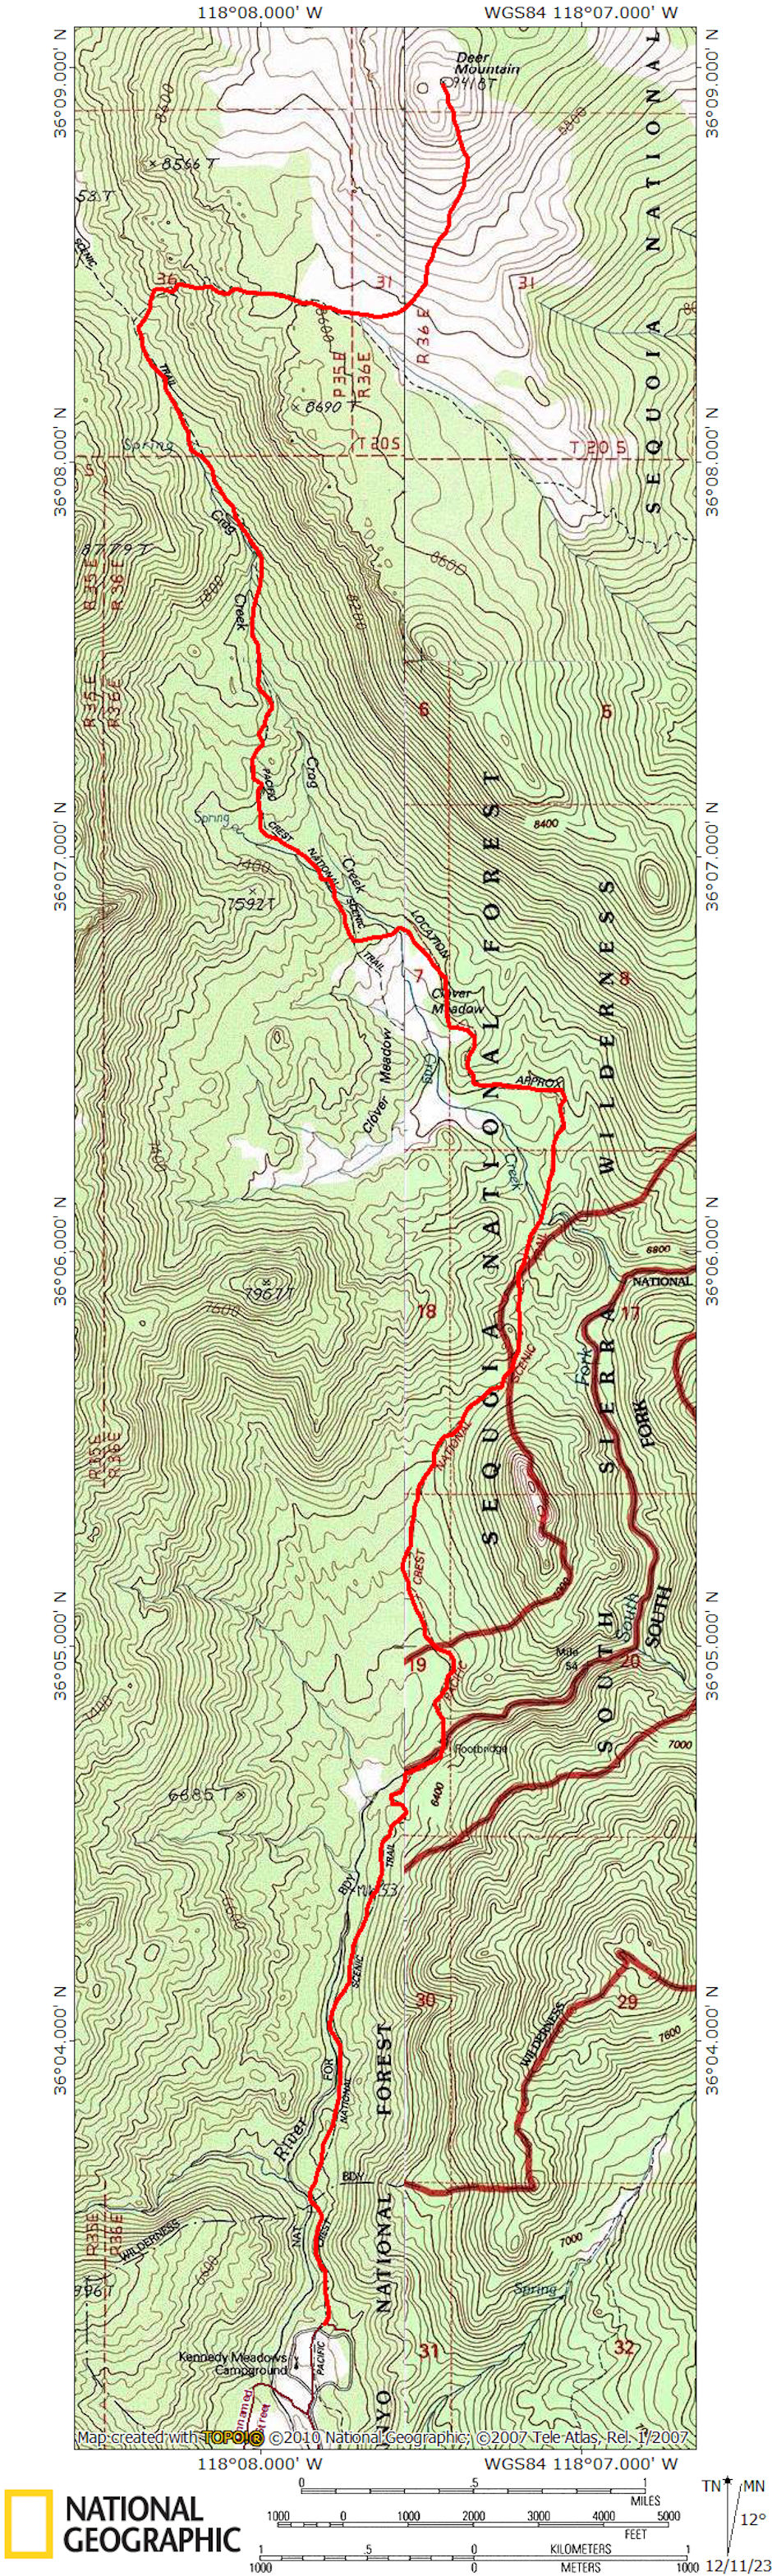 Deer Mountain route from Kennedy Meadows 1977